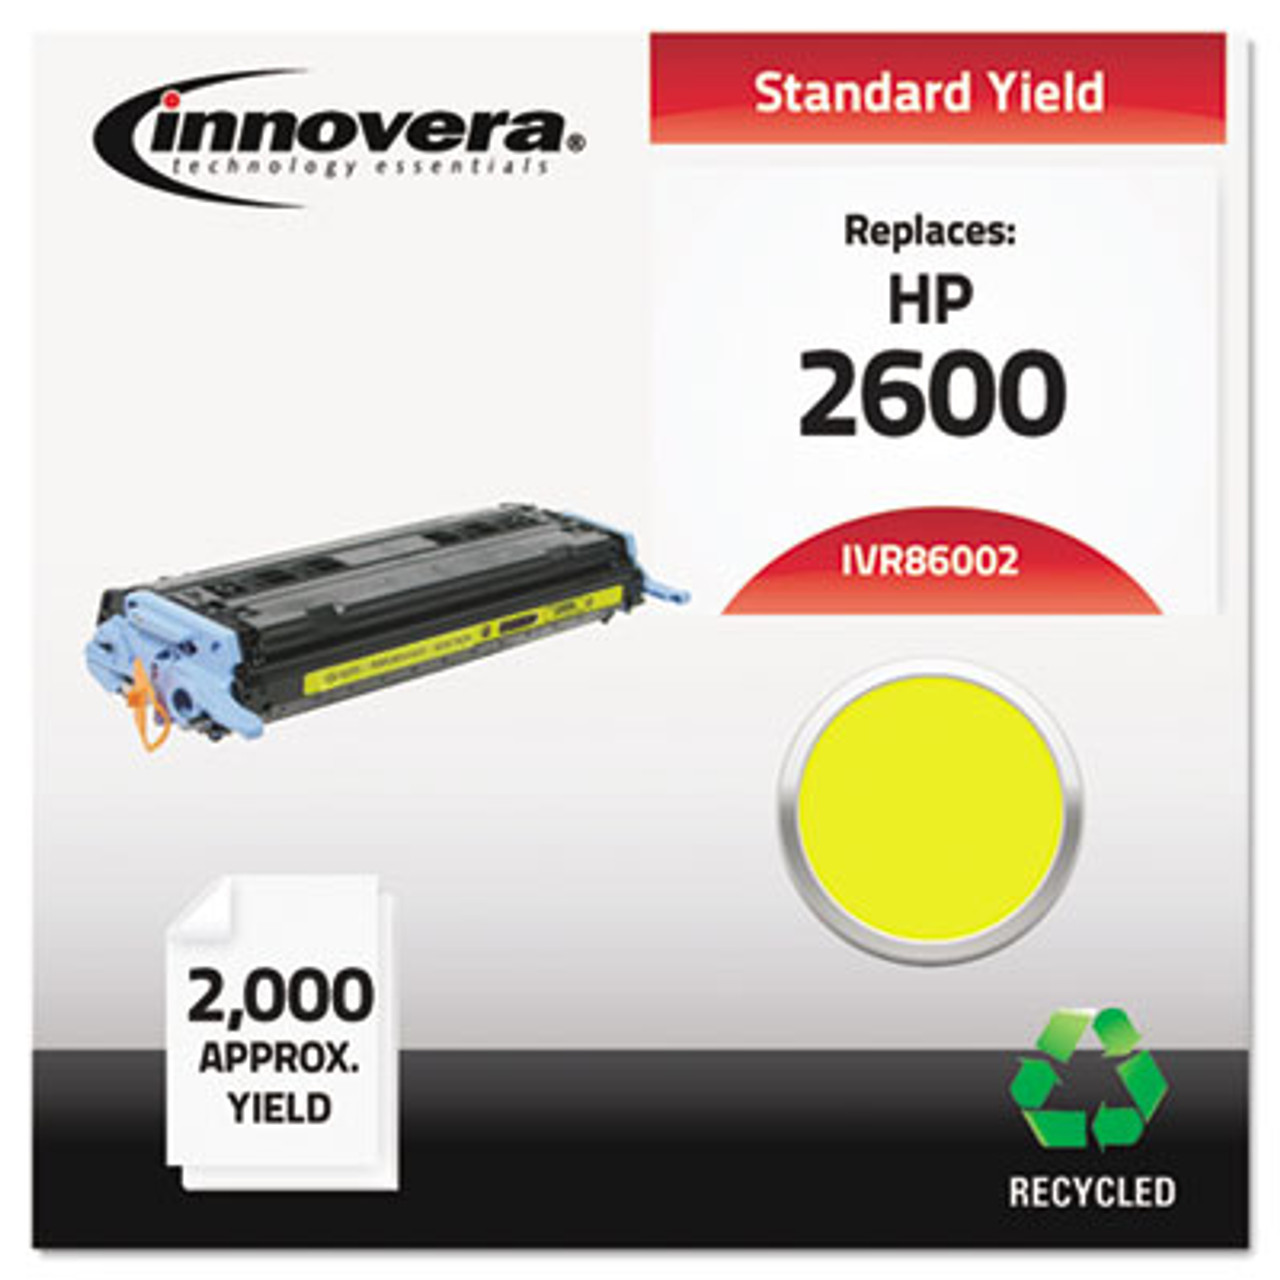 Remanufactured Q6002A (124A) Laser Toner, 2000 Yield, Yellow